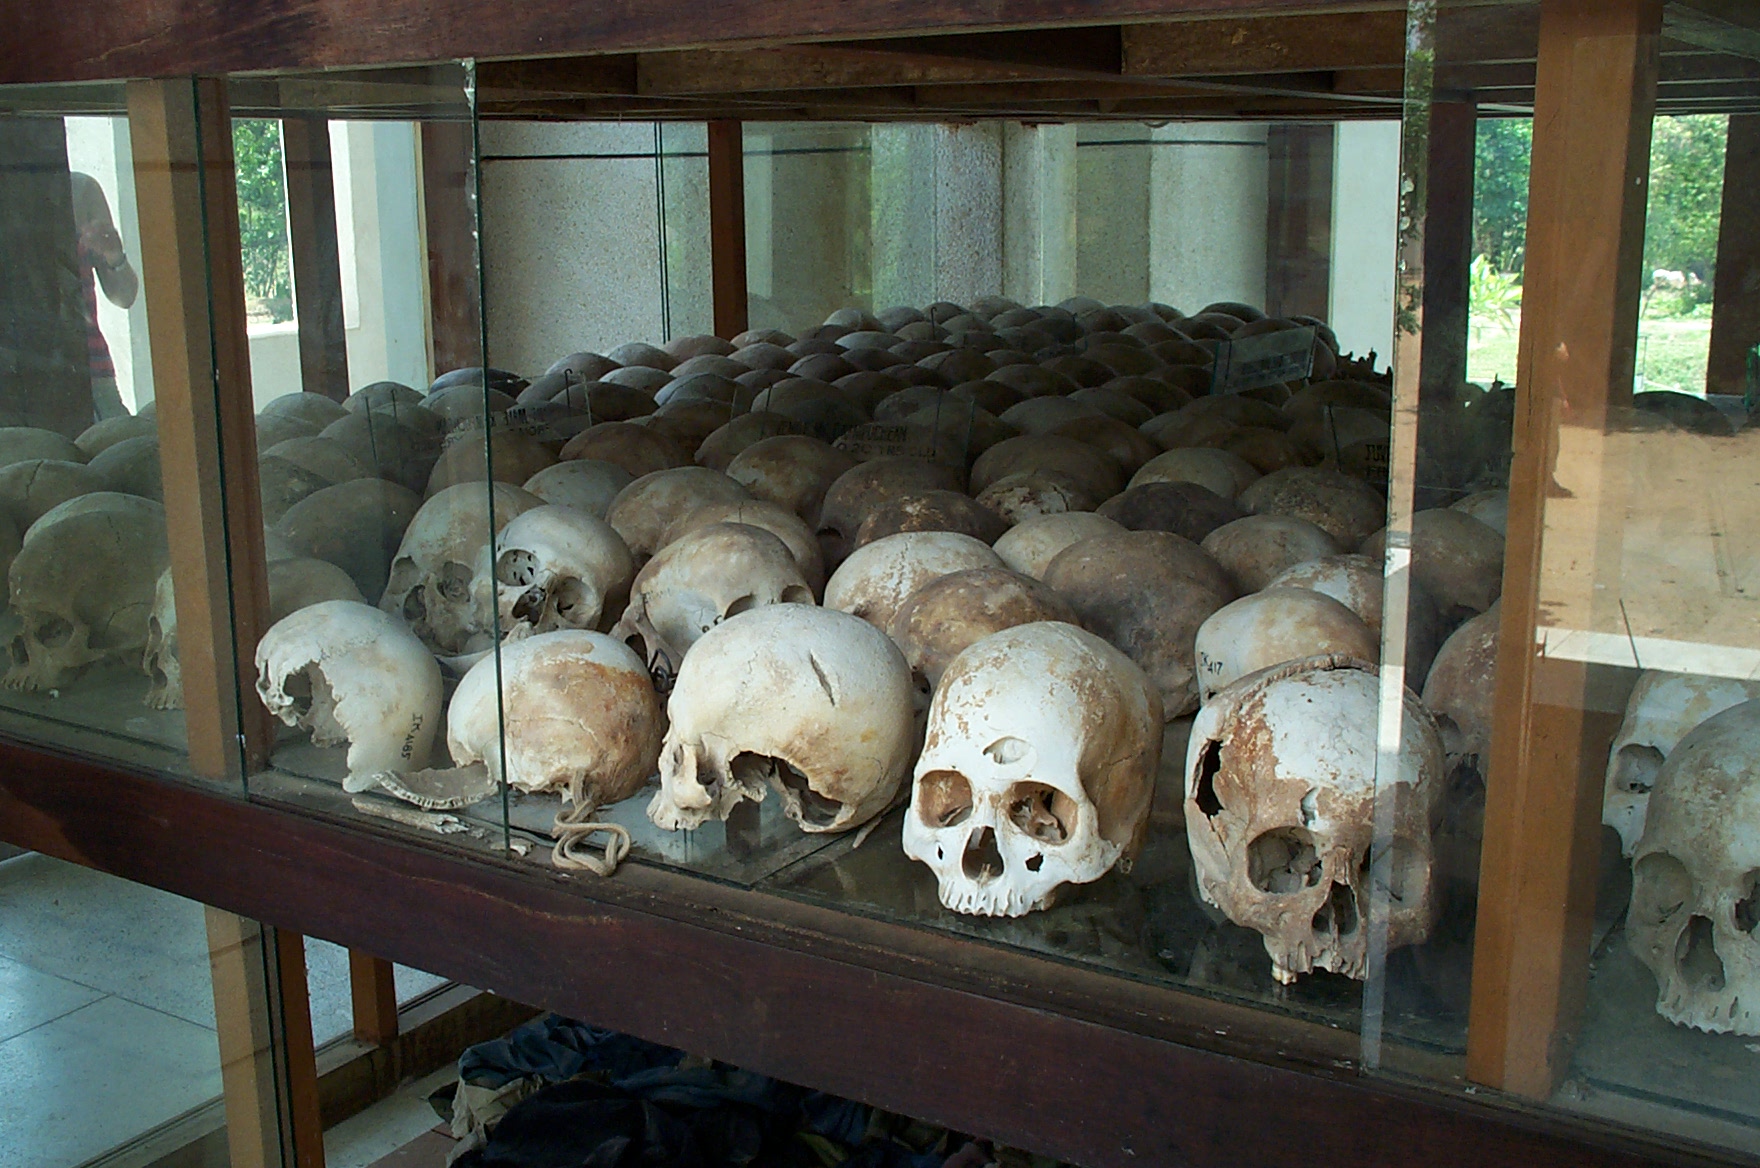 khmer rouge killing fields and genocide